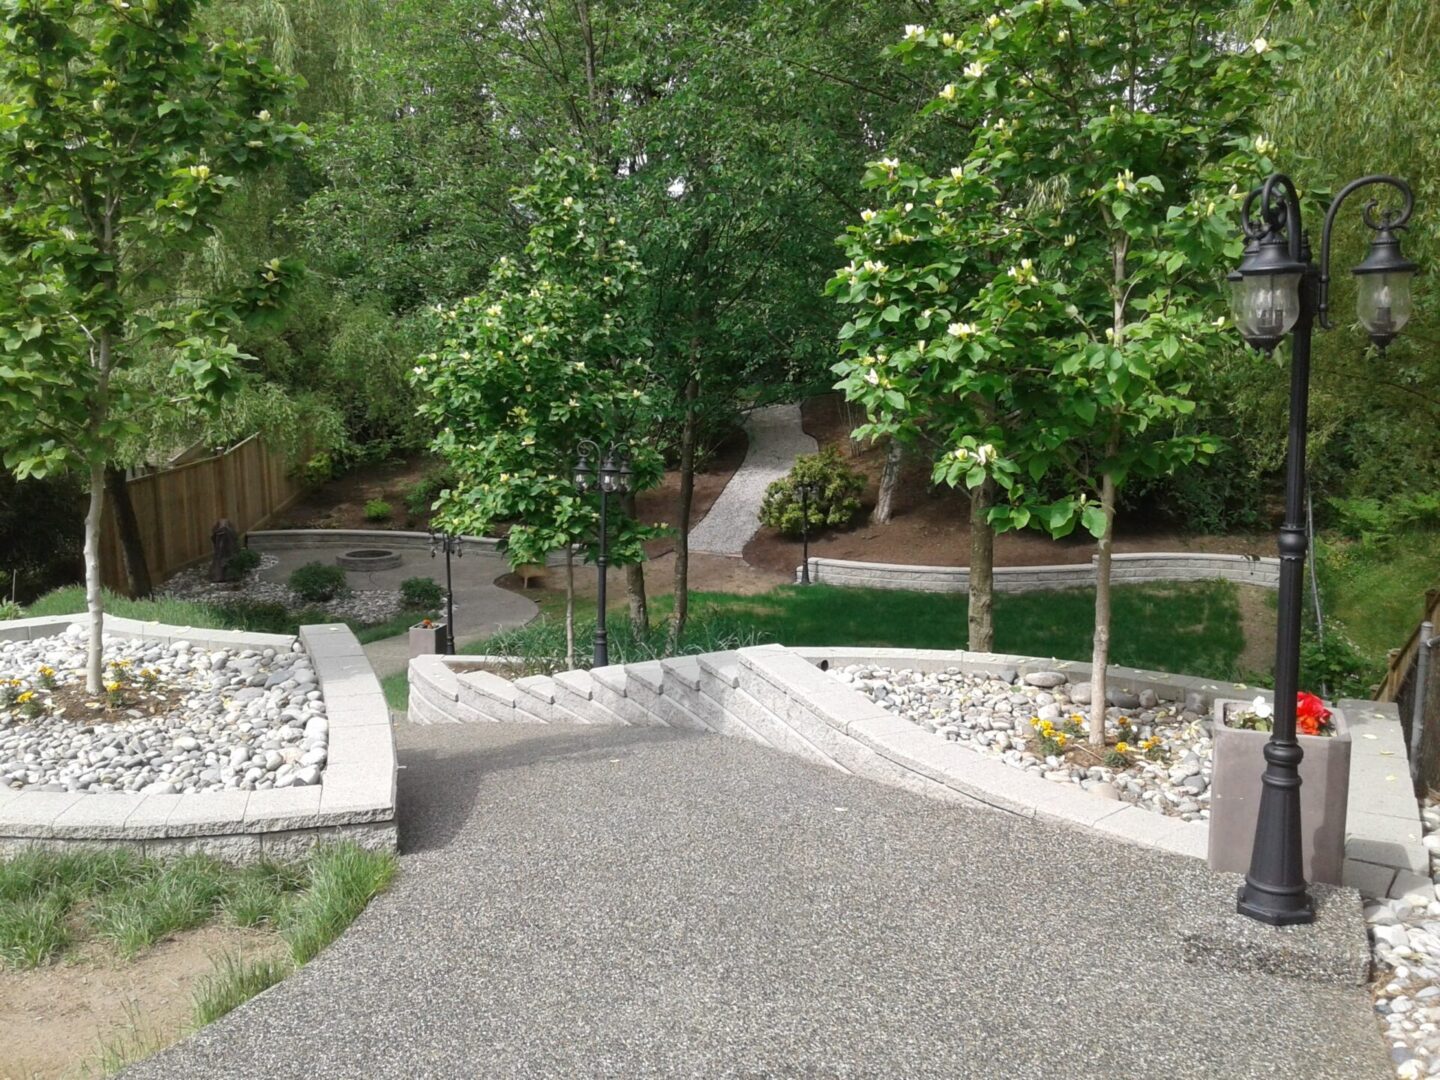 A serene park pathway lined with trees and lamps, featuring a gravel walkway and stone benches, surrounded by lush greenery.